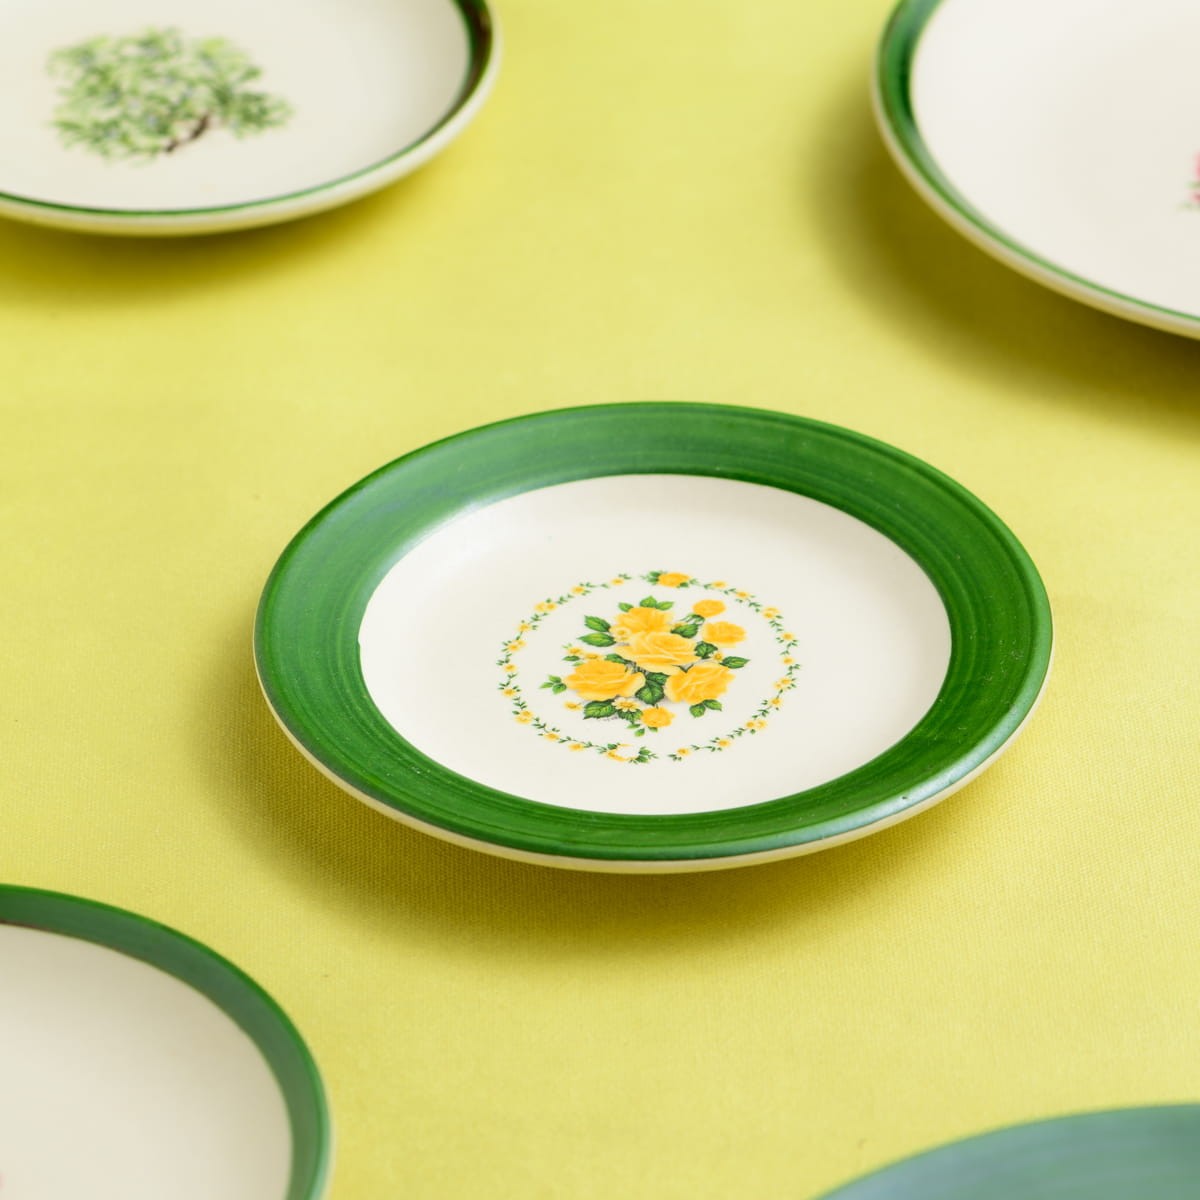 Floral Whispers in Green Wall Decor Ceramics Plate Sets